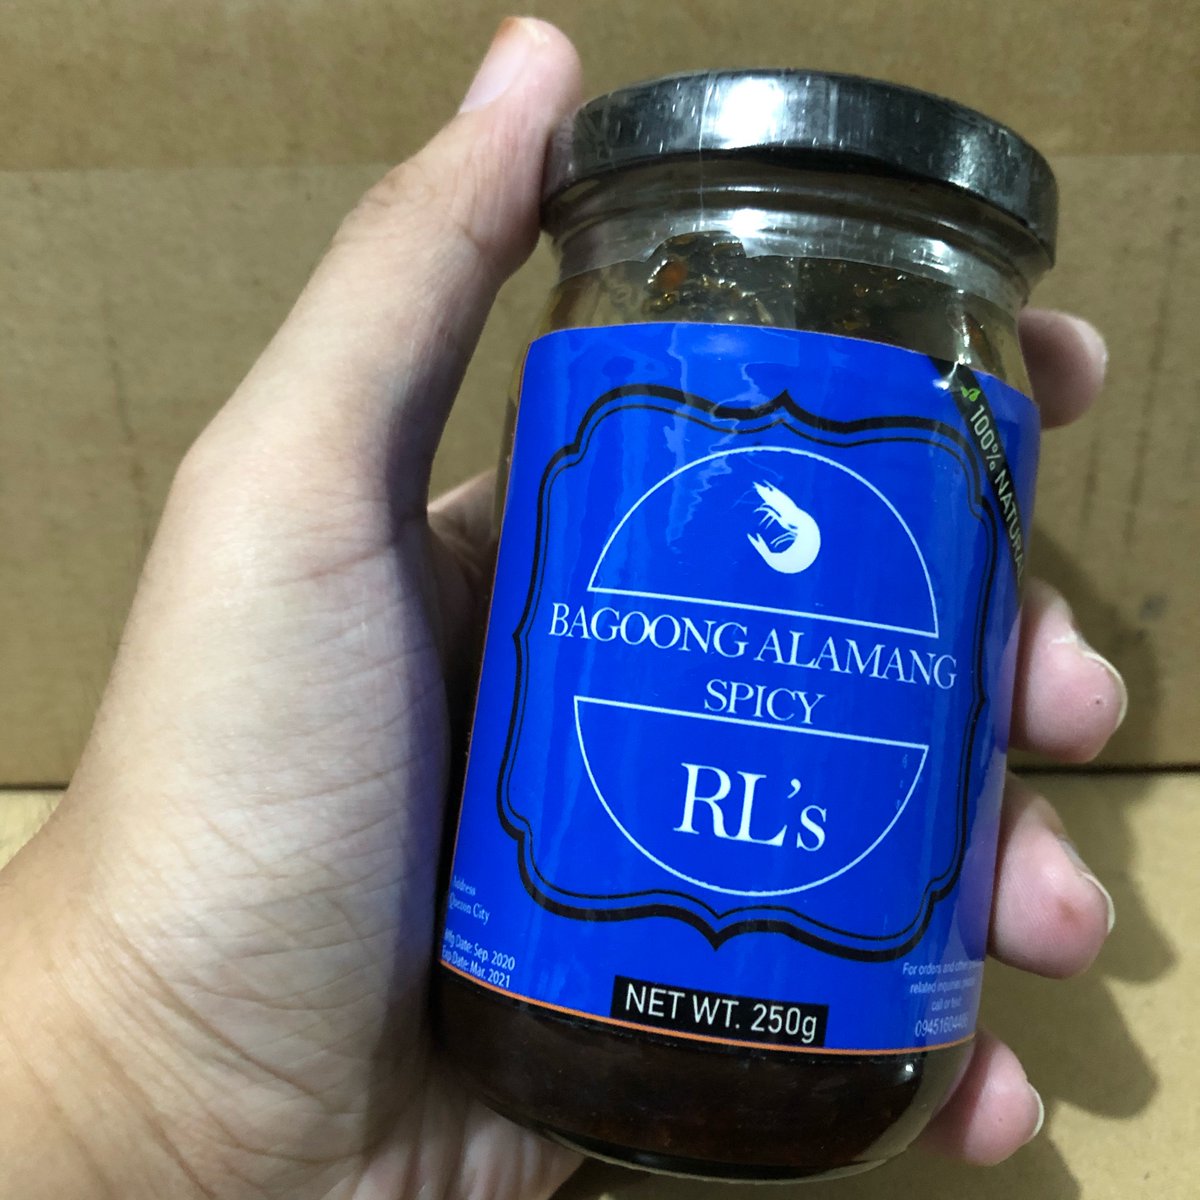 'BAGOONG ALAMANG'

‼️LESS OIL MORE ON MIXTURE,👌👌👀

Available Flavors (250g size):
⚫️Sweet
⚫️Spicy 🌶

🔥No preservatives added
🔥Long sheĺf life
🔥100% homemade

PM for price and orders! 🙂

Follow us on IG: @rls_homemadegourmet
Like us on FB: facebook.com/rlshomemadegou… 💕